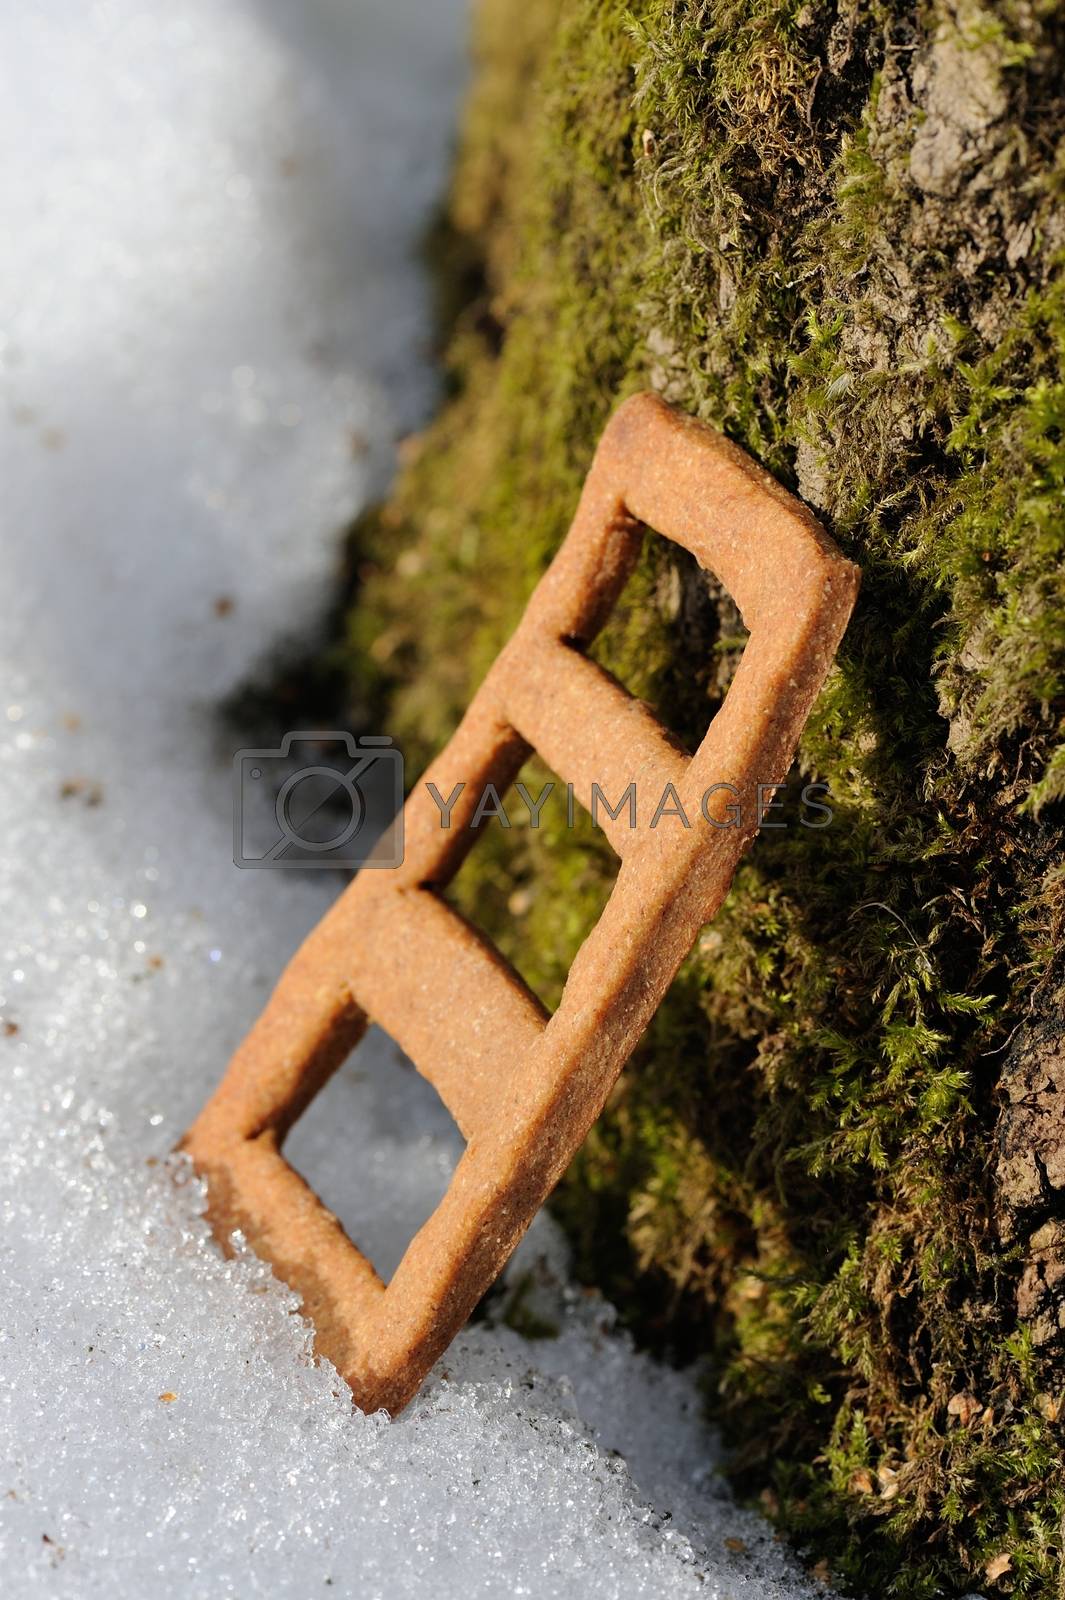 Royalty free image of Lestvitsa, Russian rye festive spring cookie in snow by Borodin